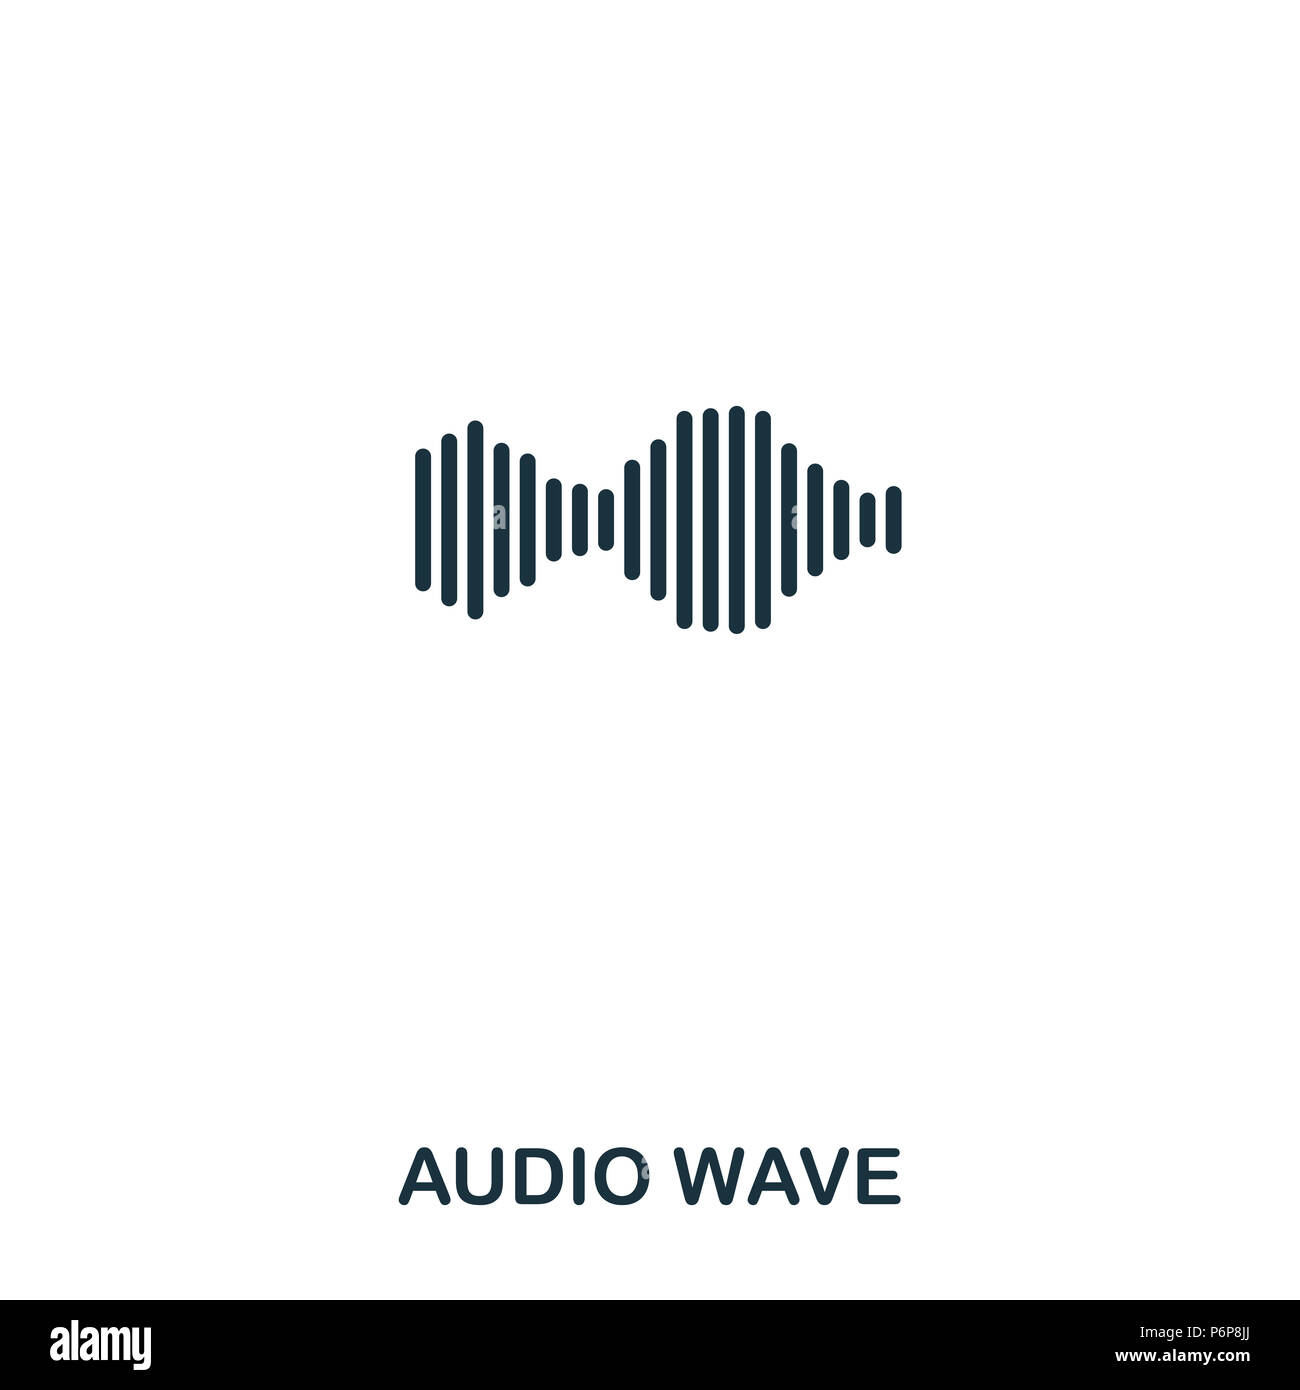 Audio Wave icon. Line style icon design. UI. Illustration of audio wave icon. Pictogram isolated on white. Ready to use in web design, apps, software, Stock Photo